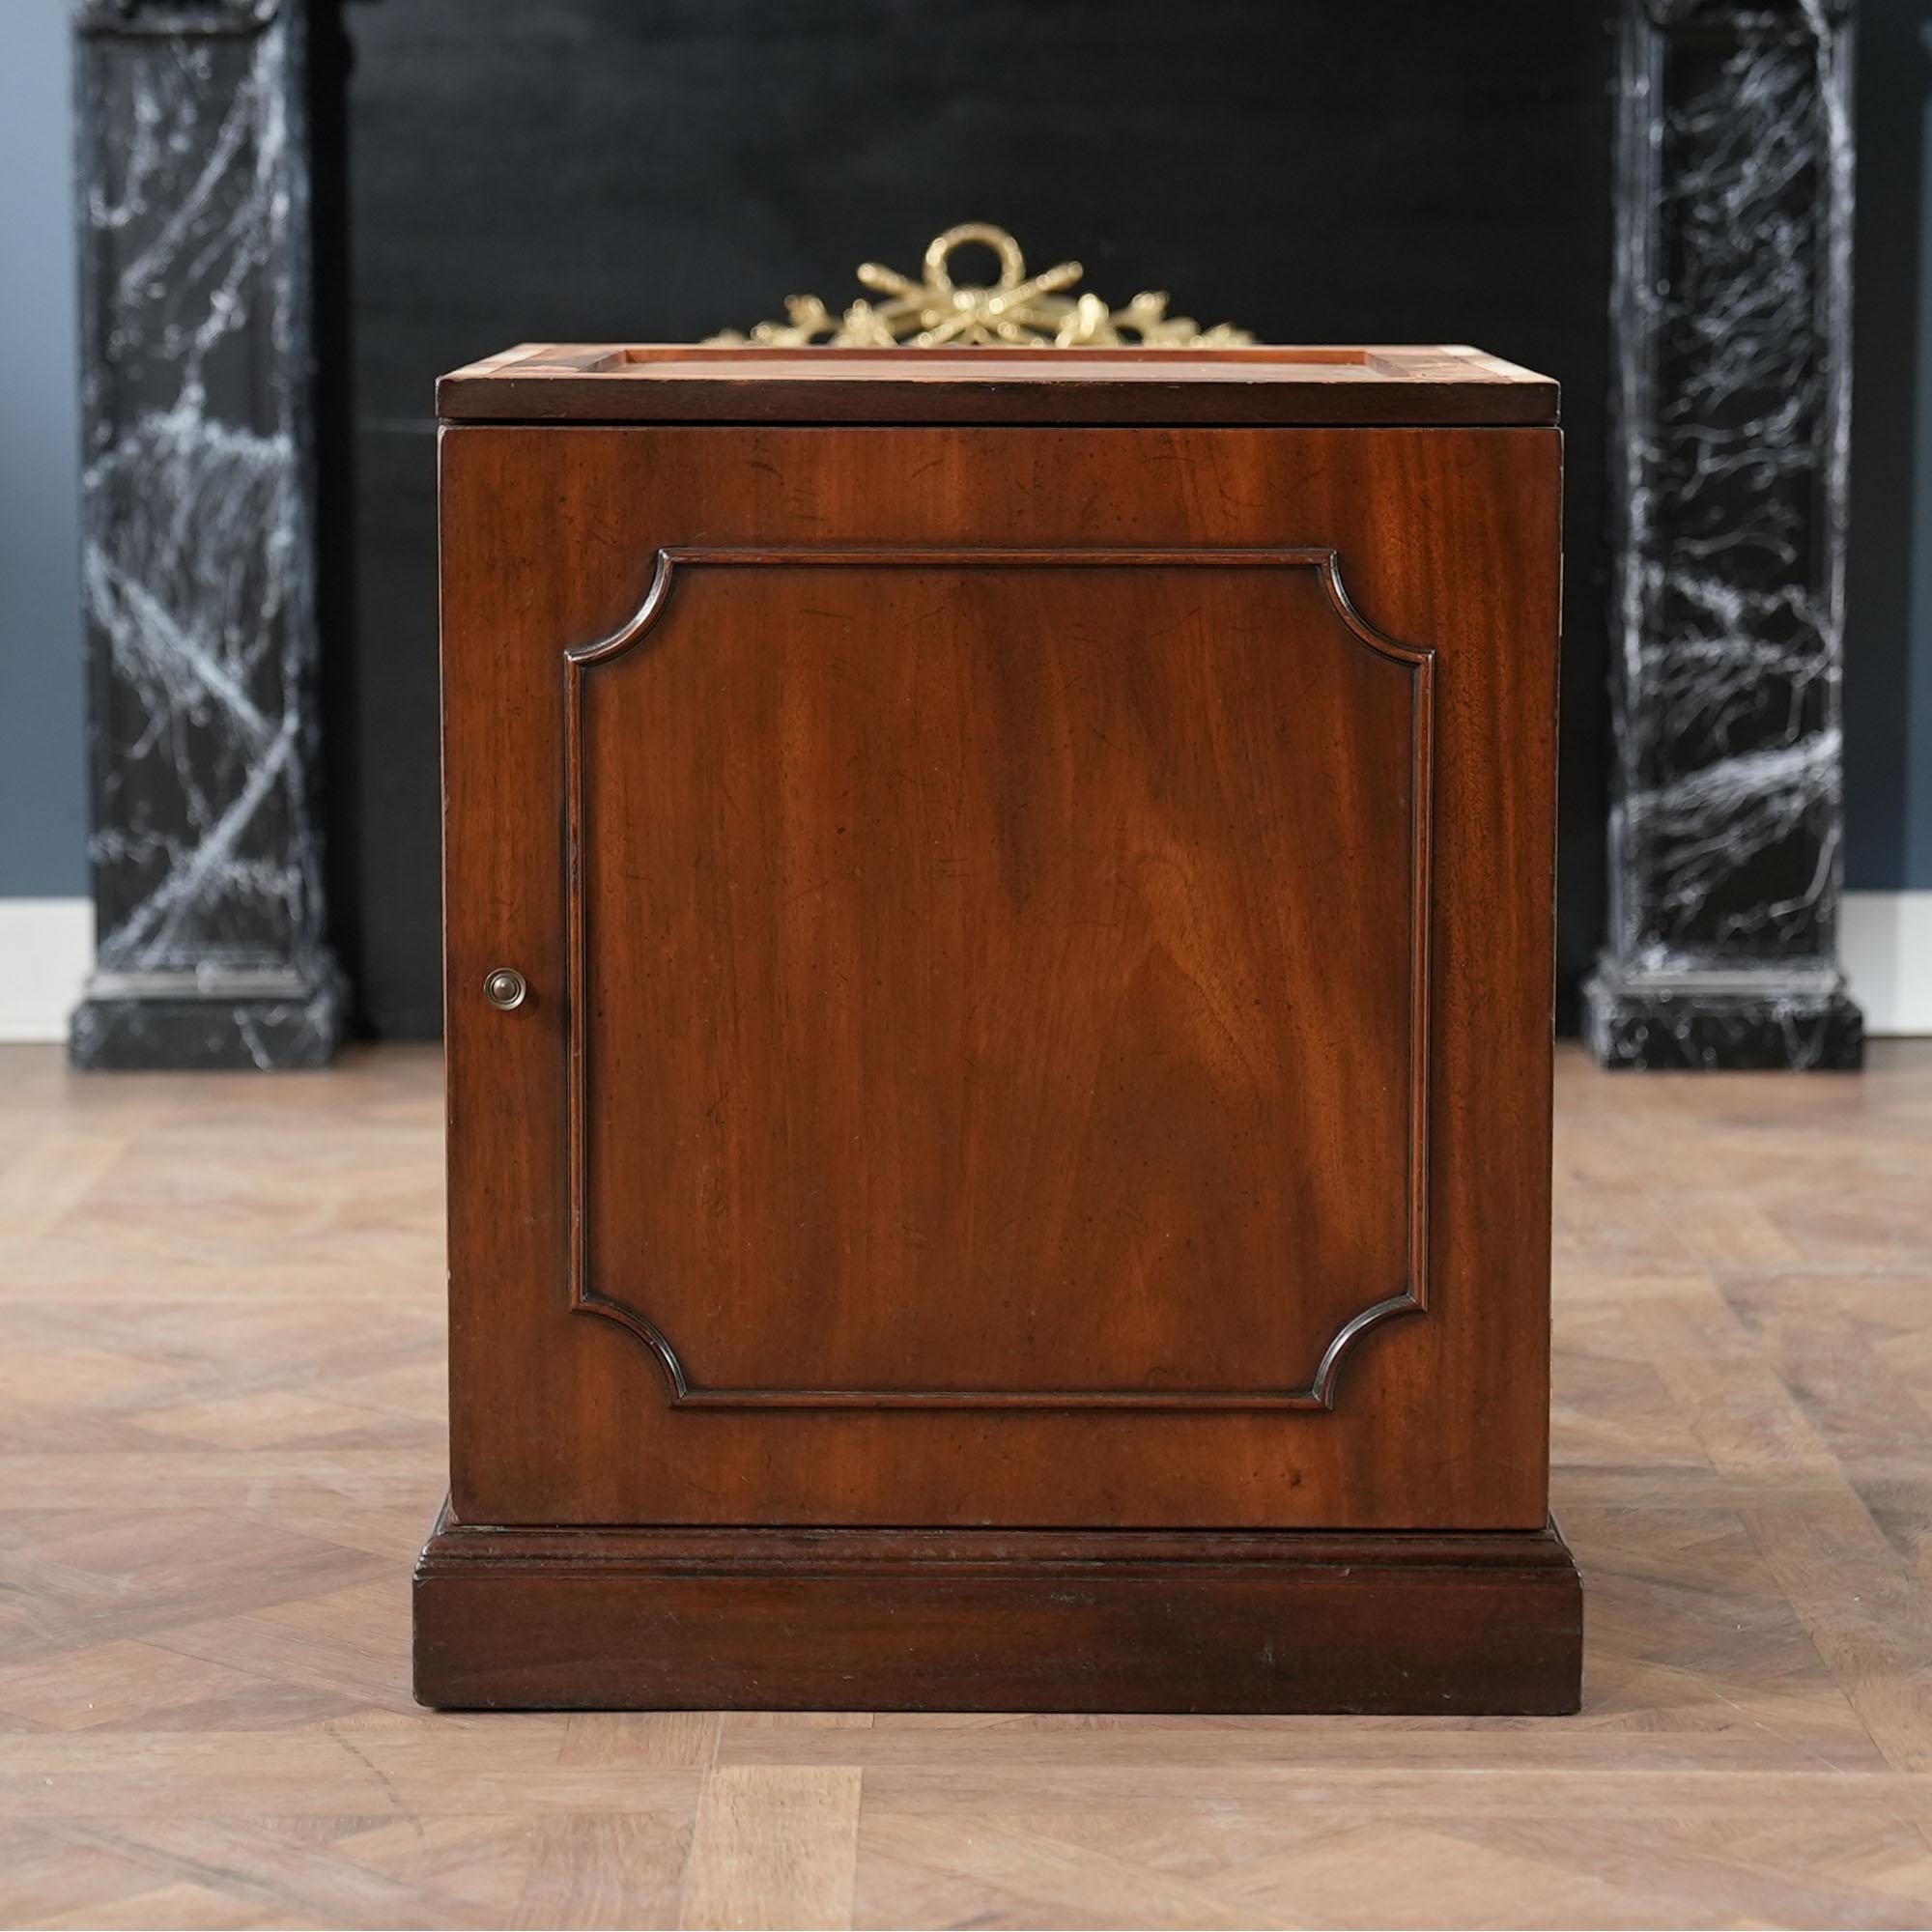 The absolute highest quality piece of American furniture production is exemplified in this Vintage Kittinger Drum Table. From the beautifully decorated and embossed genuine leather top to the sturdy base cupboard everything here works together to